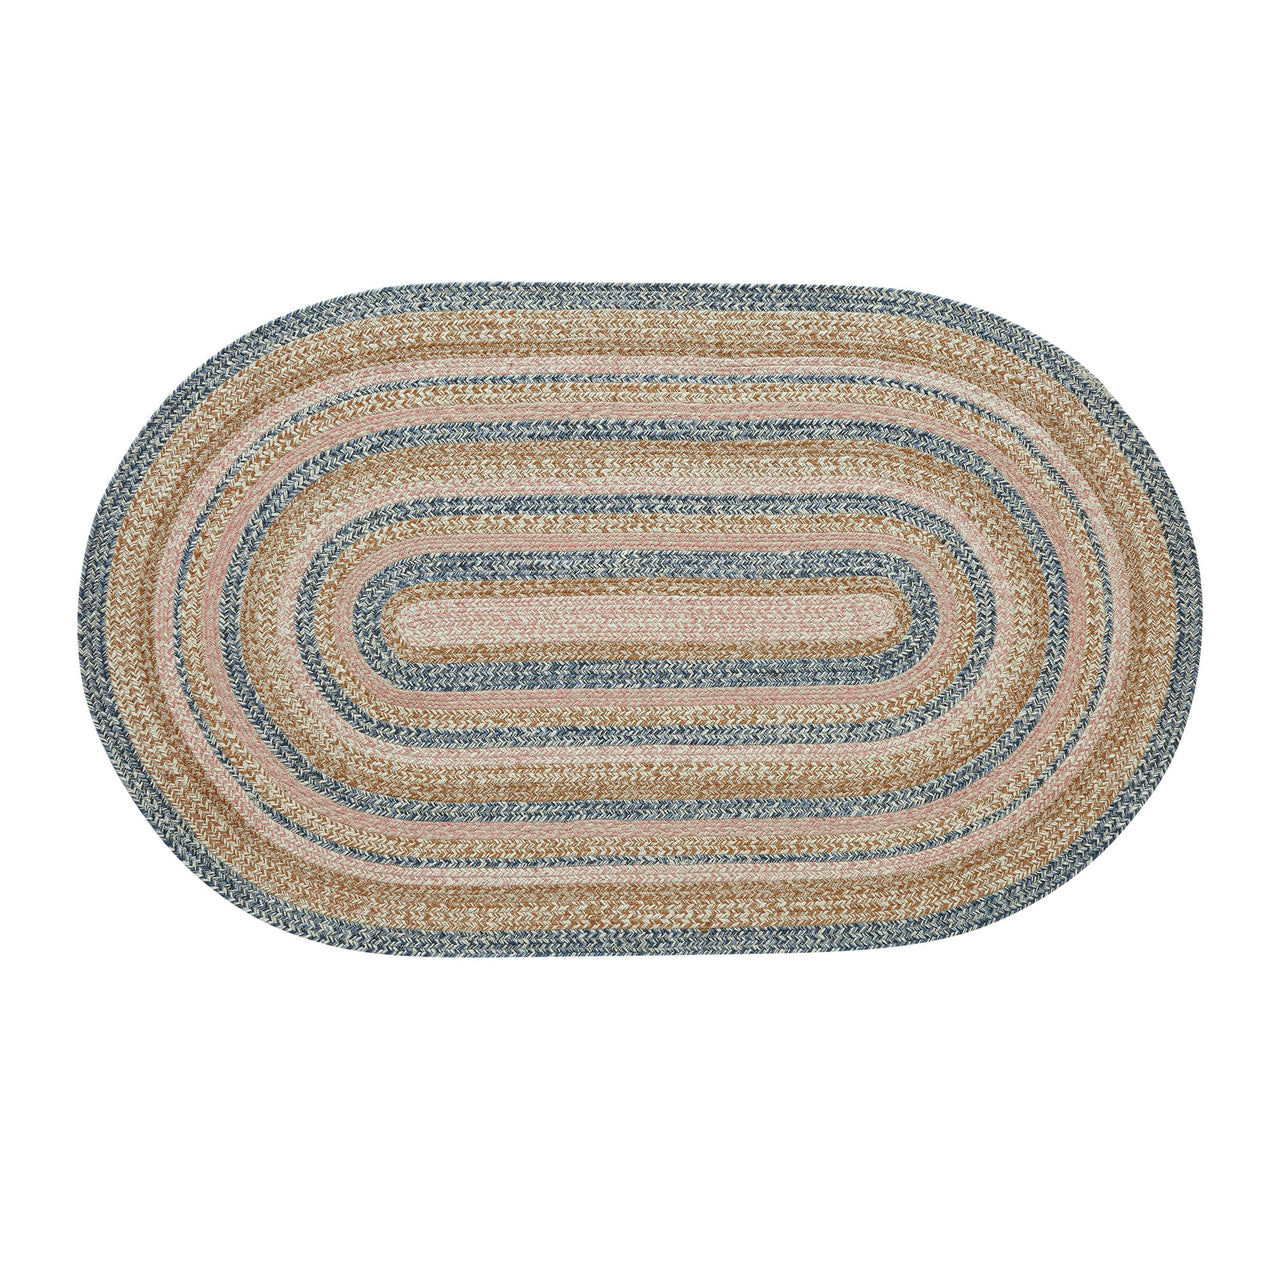 Kaila Jute Braided Rug Oval with Rug Pad 36"x60" (3'x5') VHC Brands